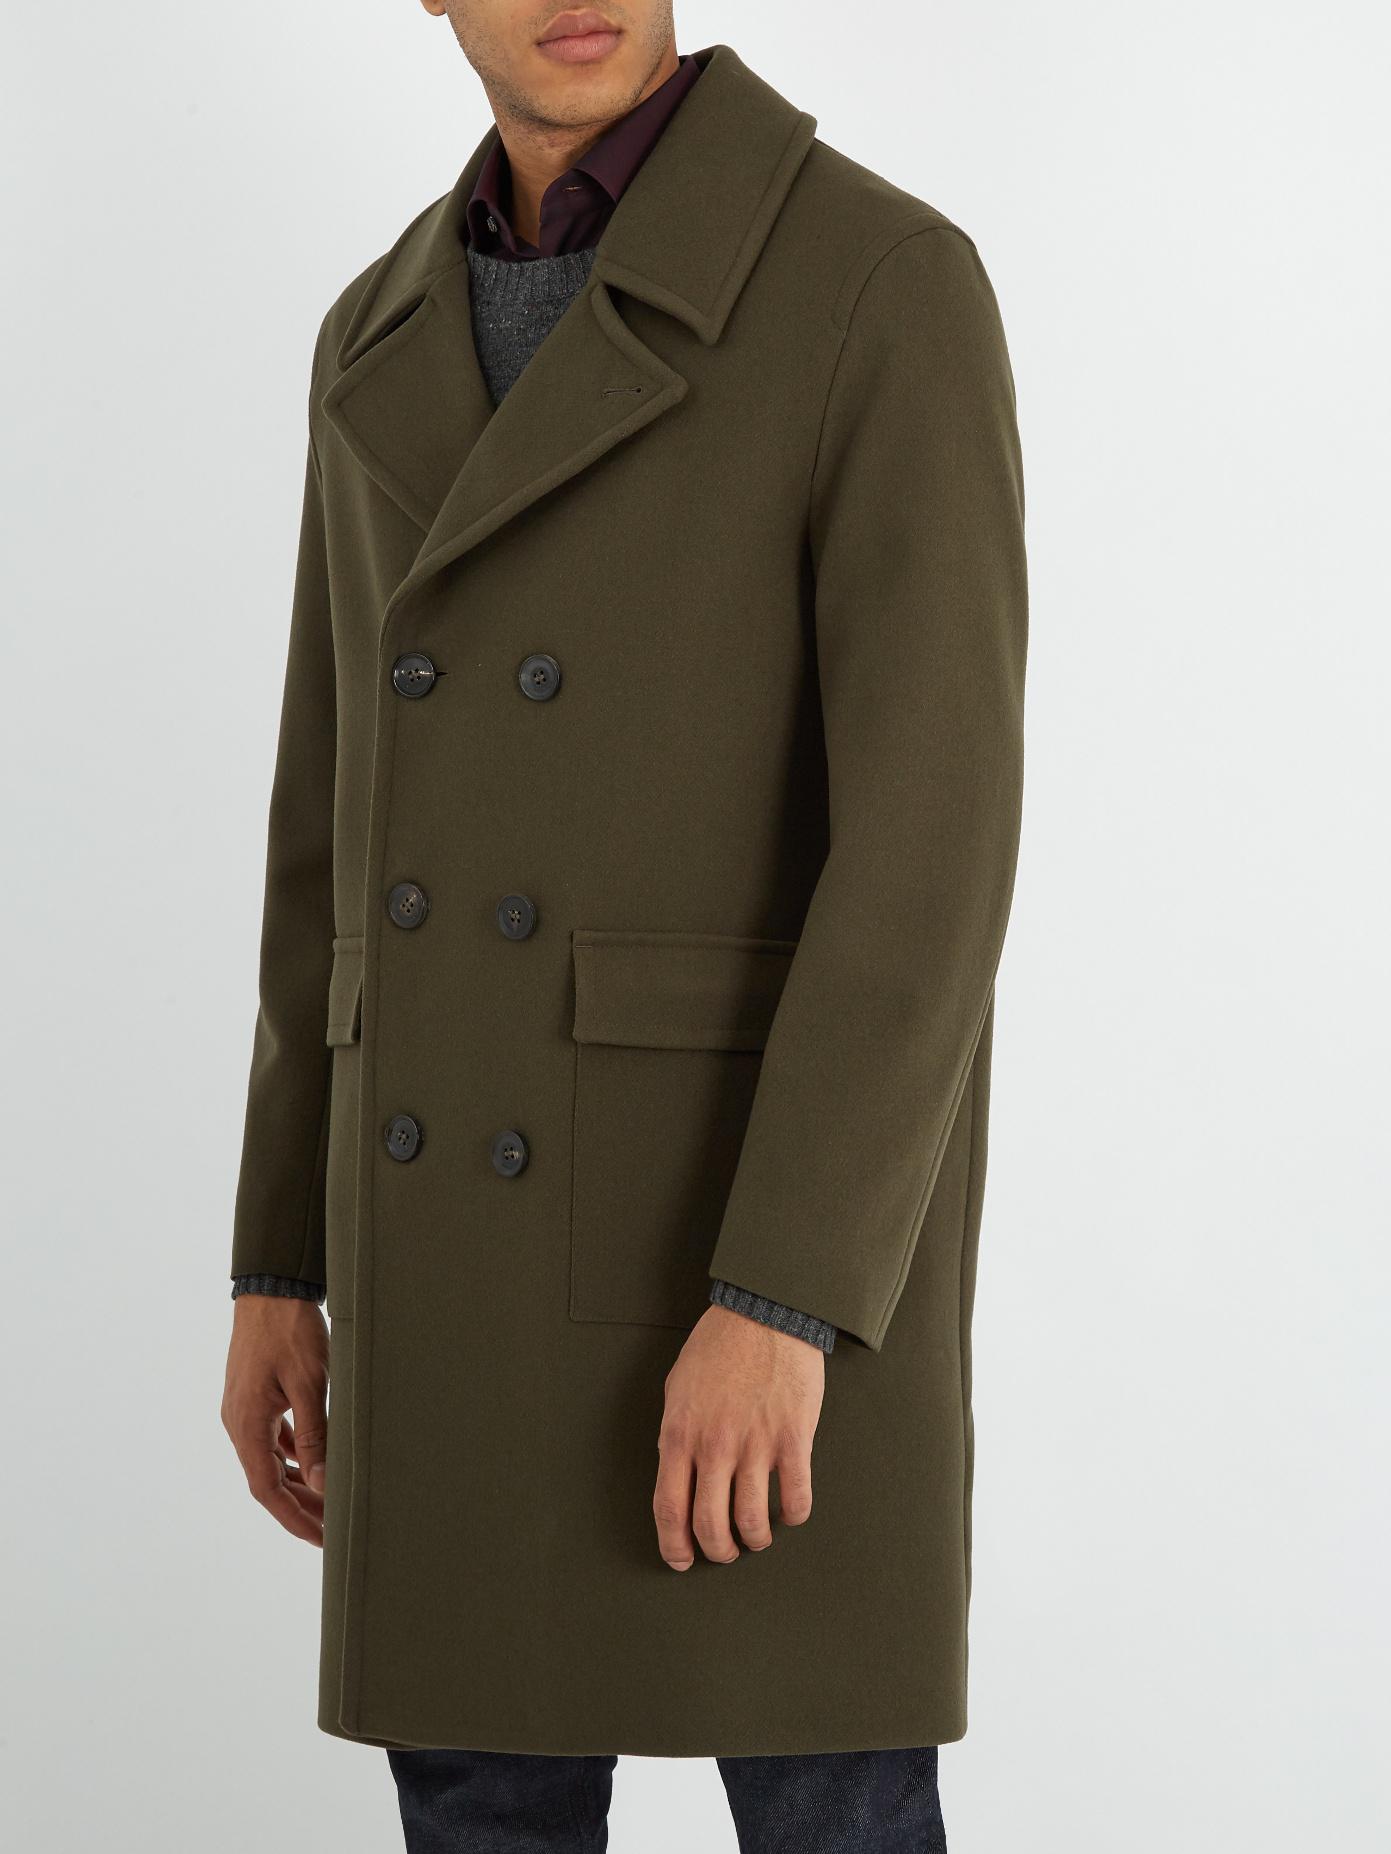 Mackintosh Double-breasted Wool Coat in Dark Green (Green) for Men - Lyst